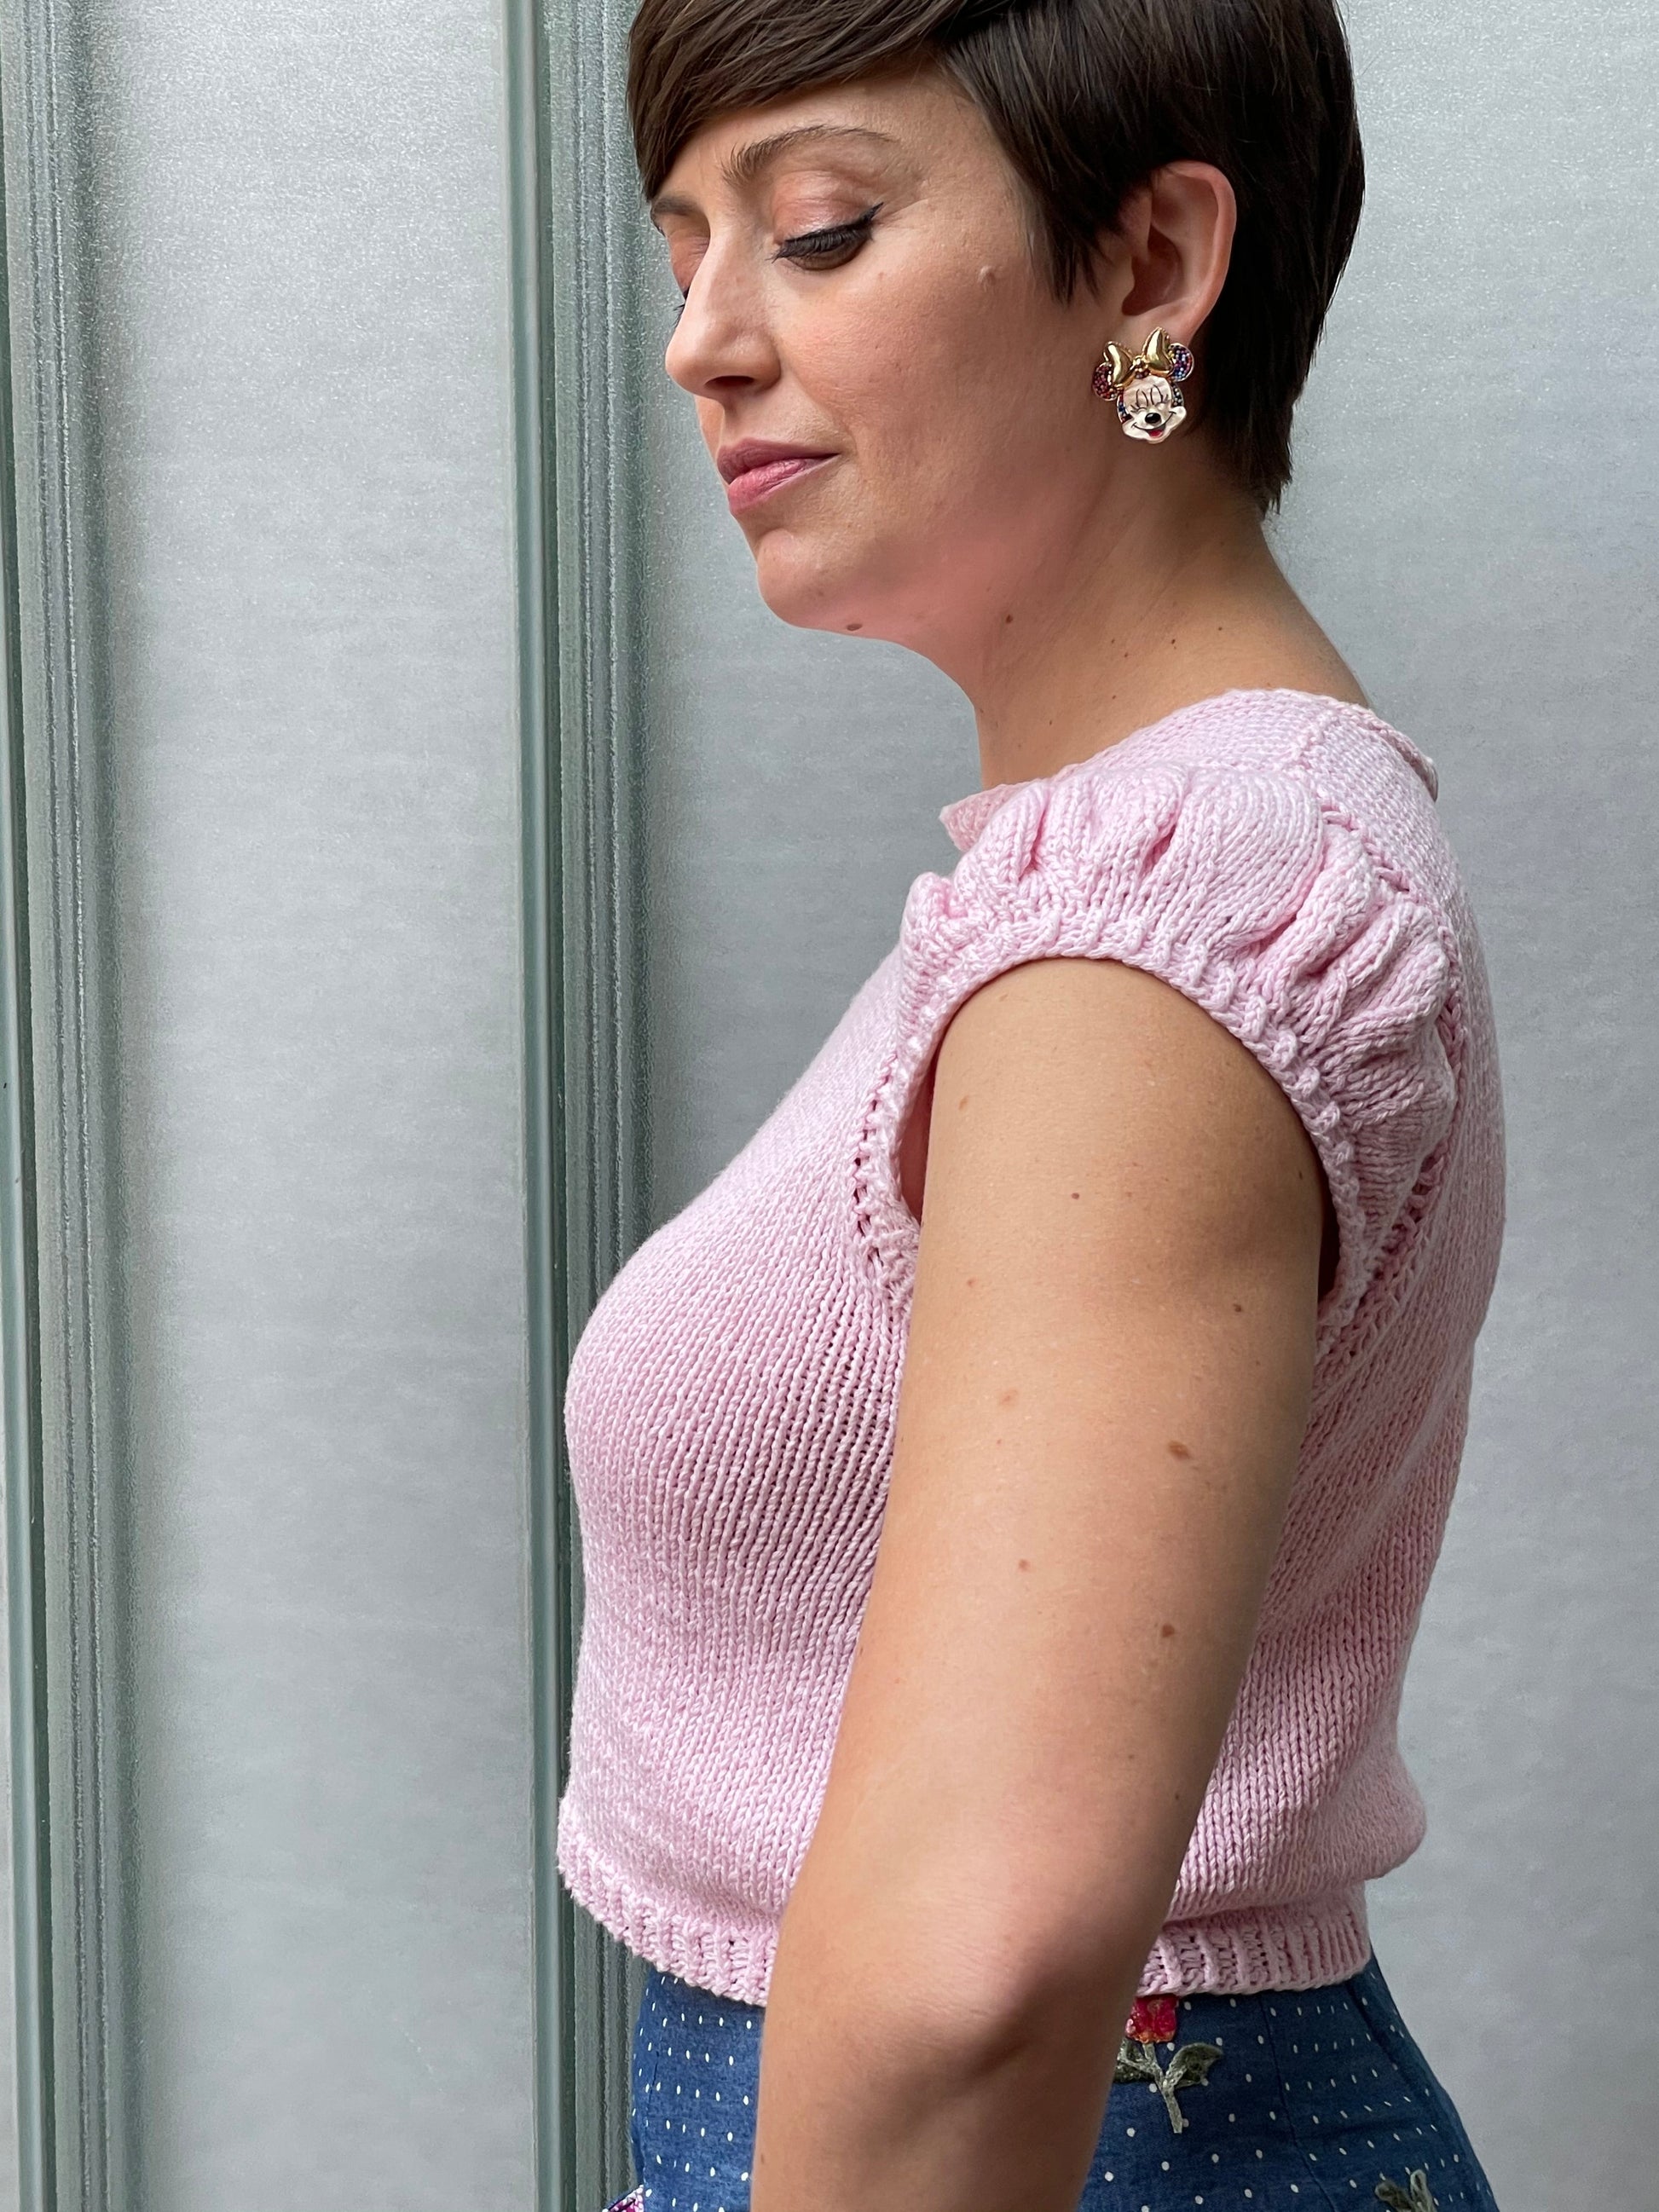 Seen from the side, Jeanette wears a light pink tee, knit with ruffled sleeves, over a blue skirt. The tee is a cropped, waist length.